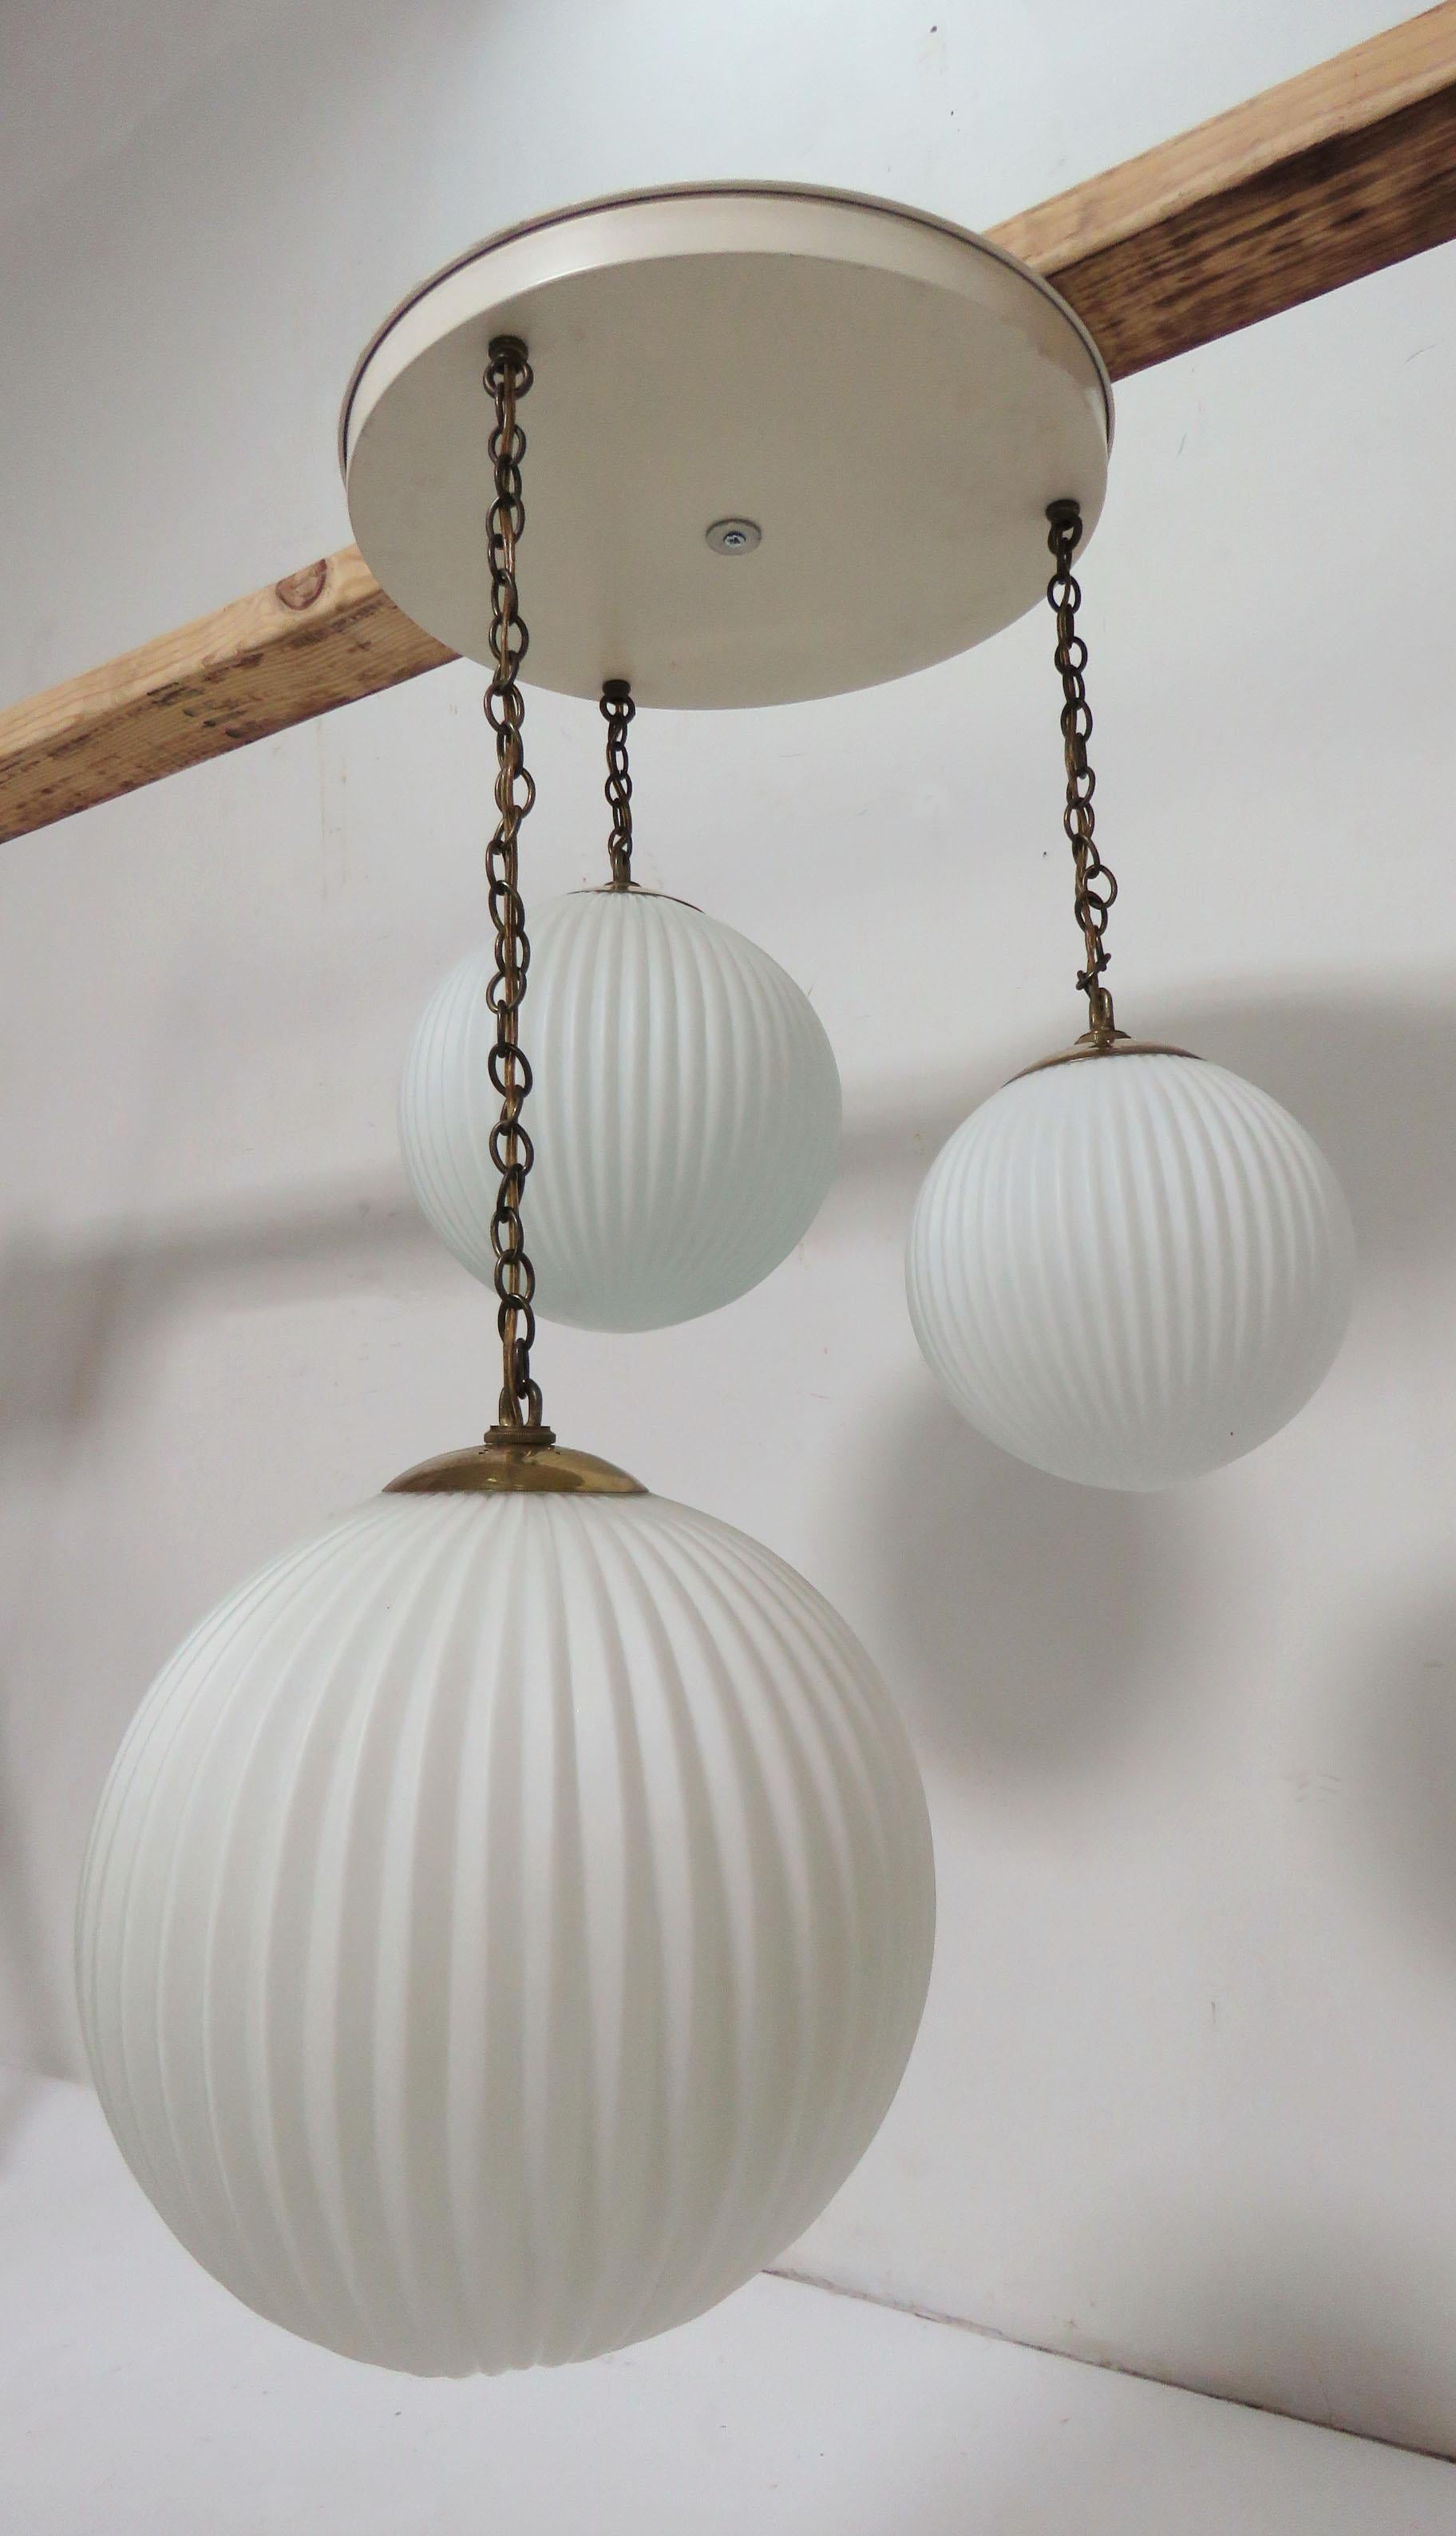 Mid-Century Modern pendant fixture of three ribbed glass globes, circa 1950s. 
Shades measure 12